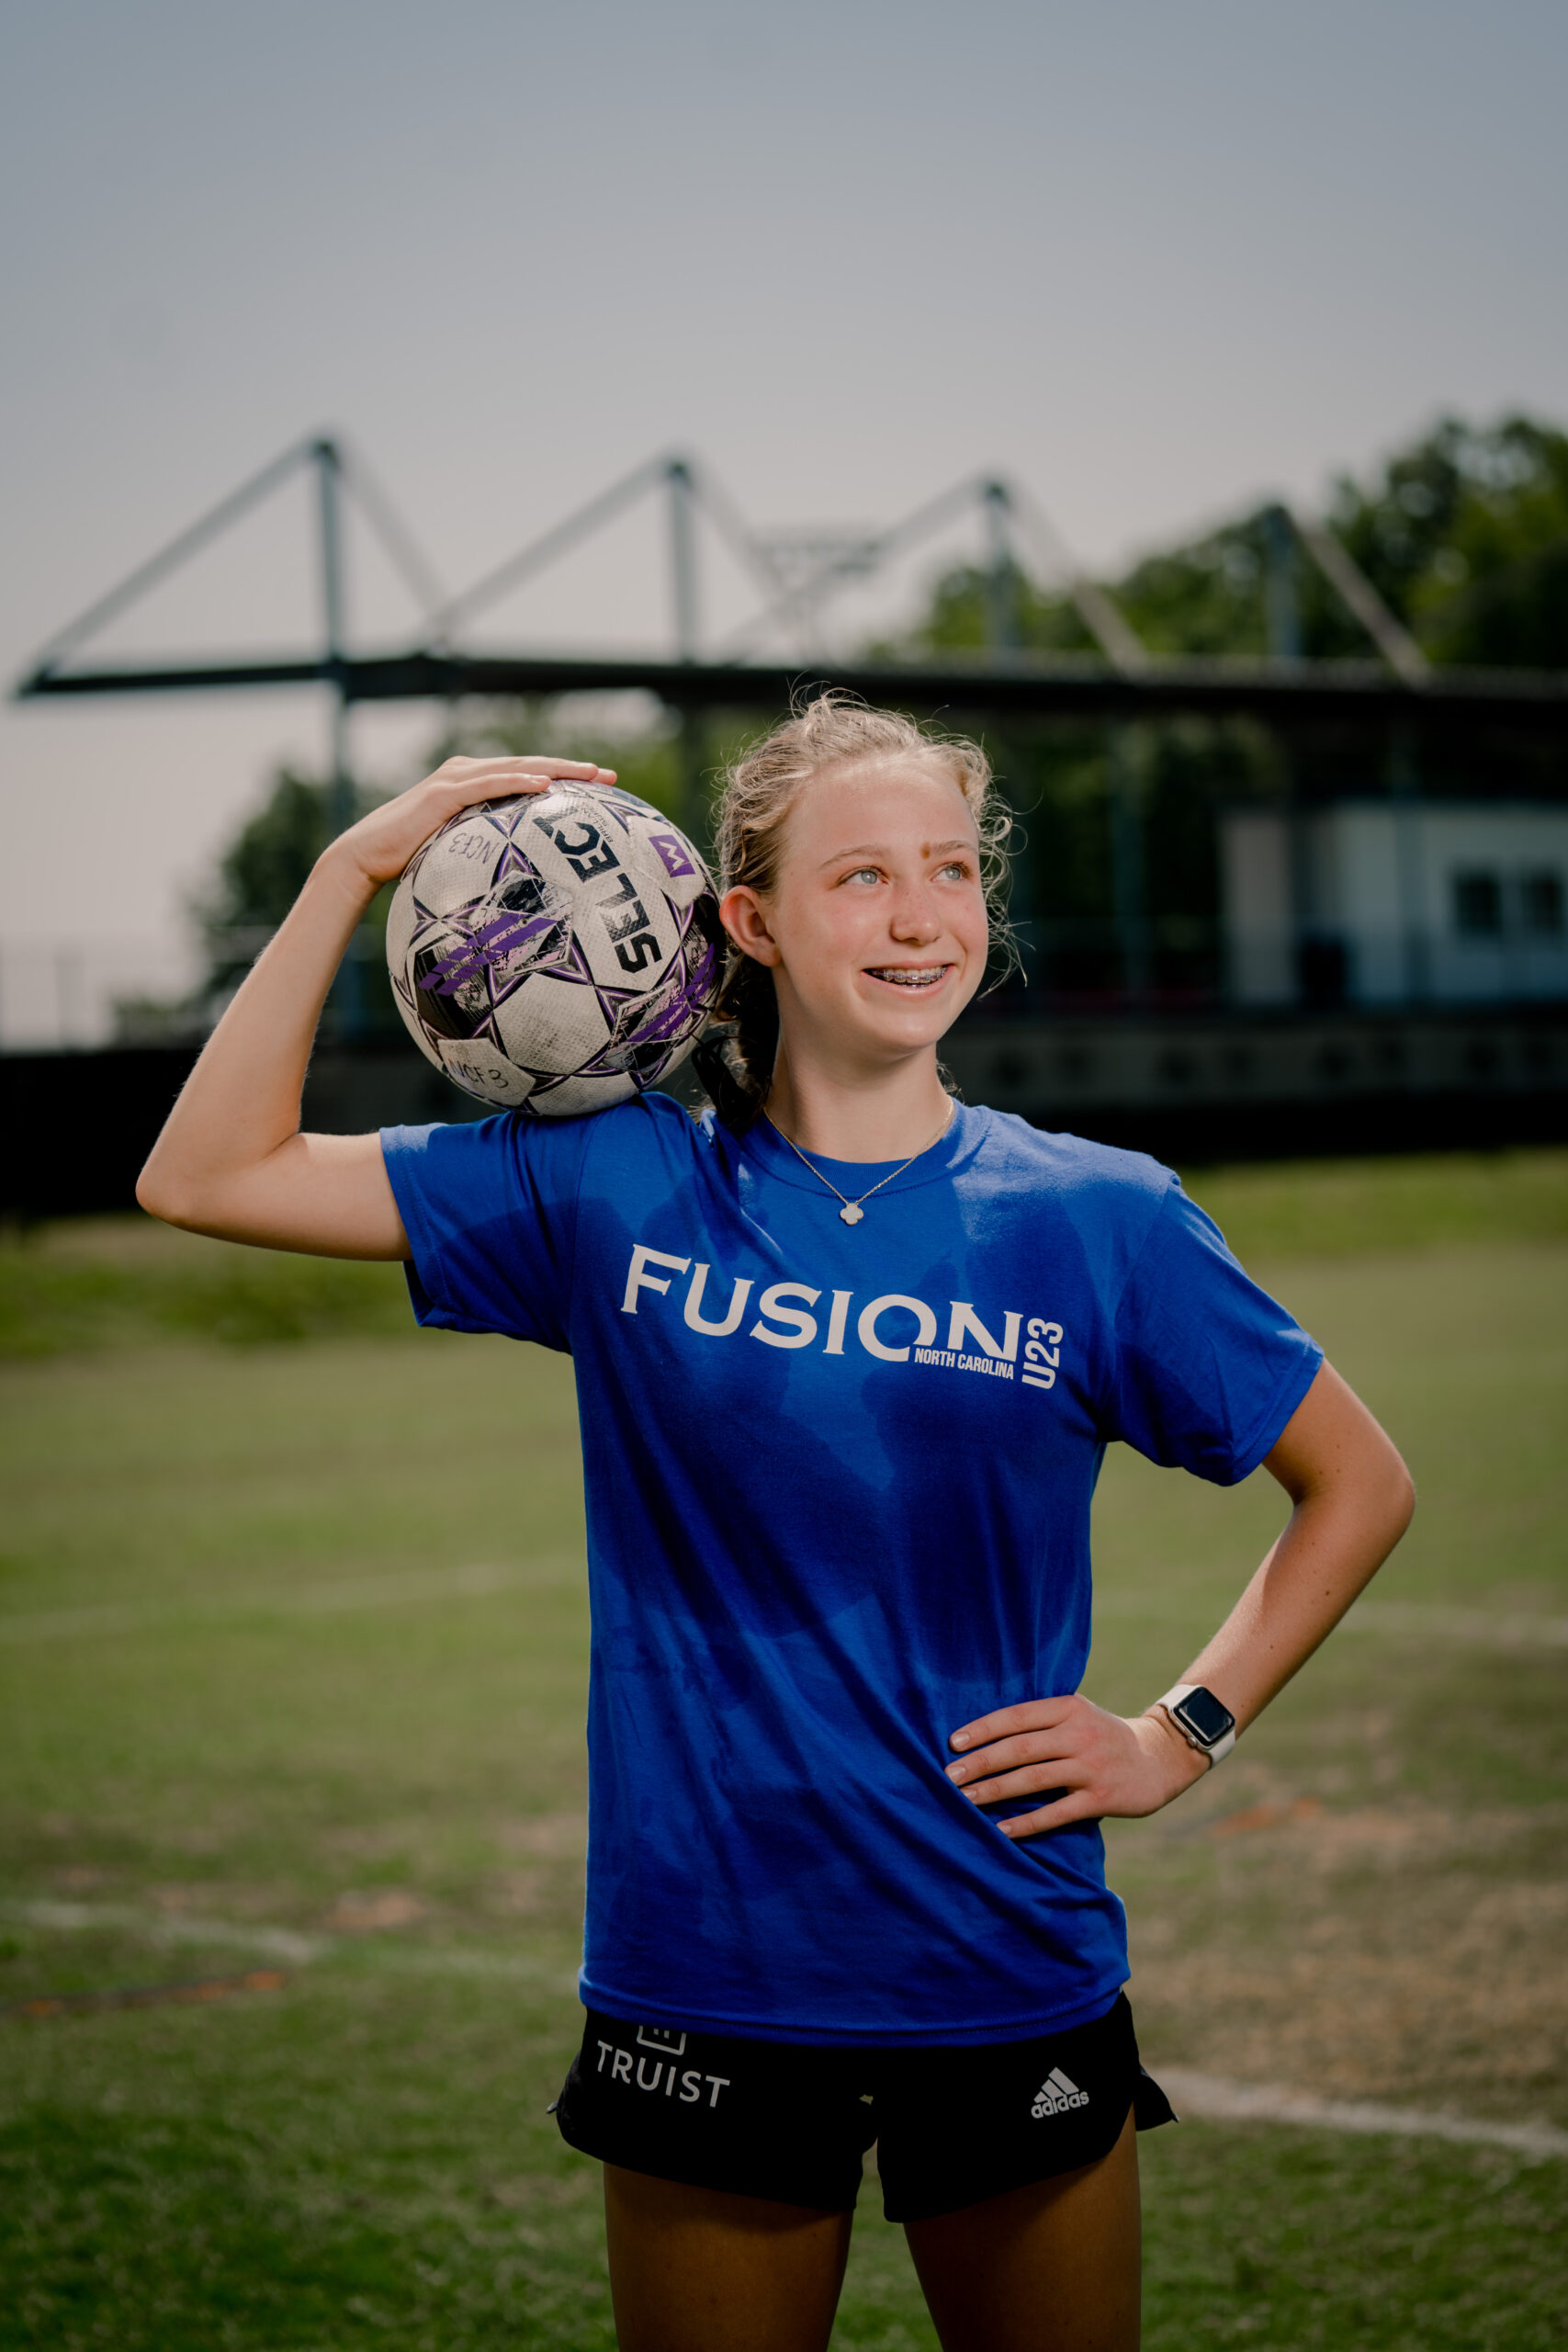 Sophie Wyshner stands on a soccer field and holds a soccer ball on her right shoulder. She